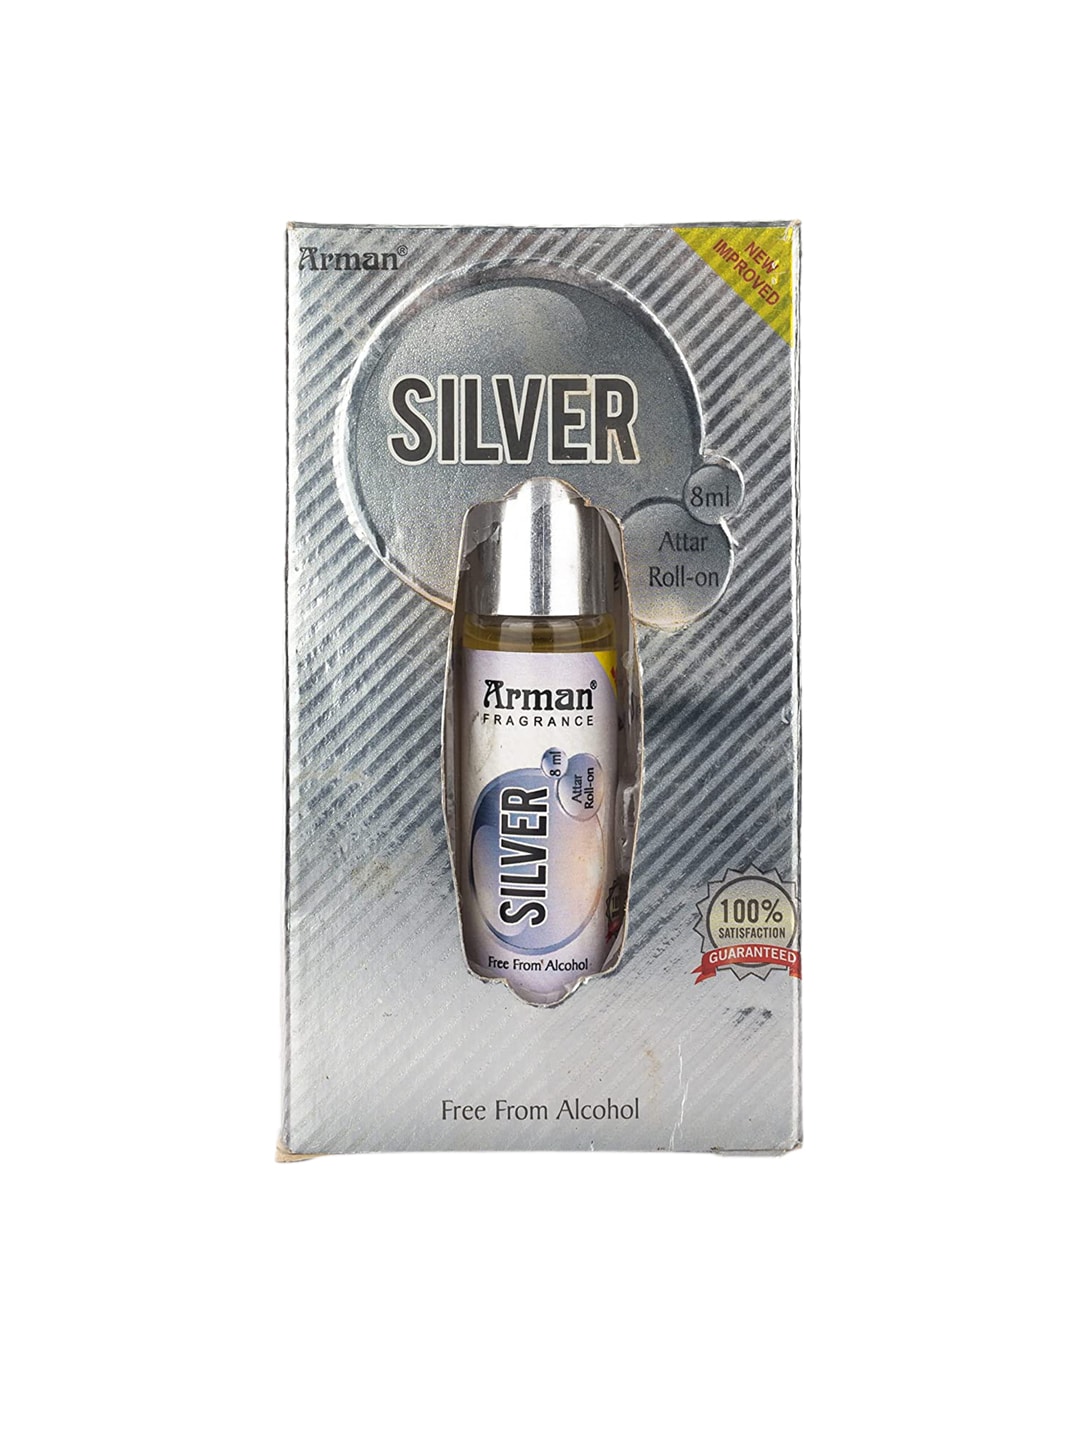 Arman Long Lasting Alcohol Free Silver Attar Roll On - 6 ml Price in India